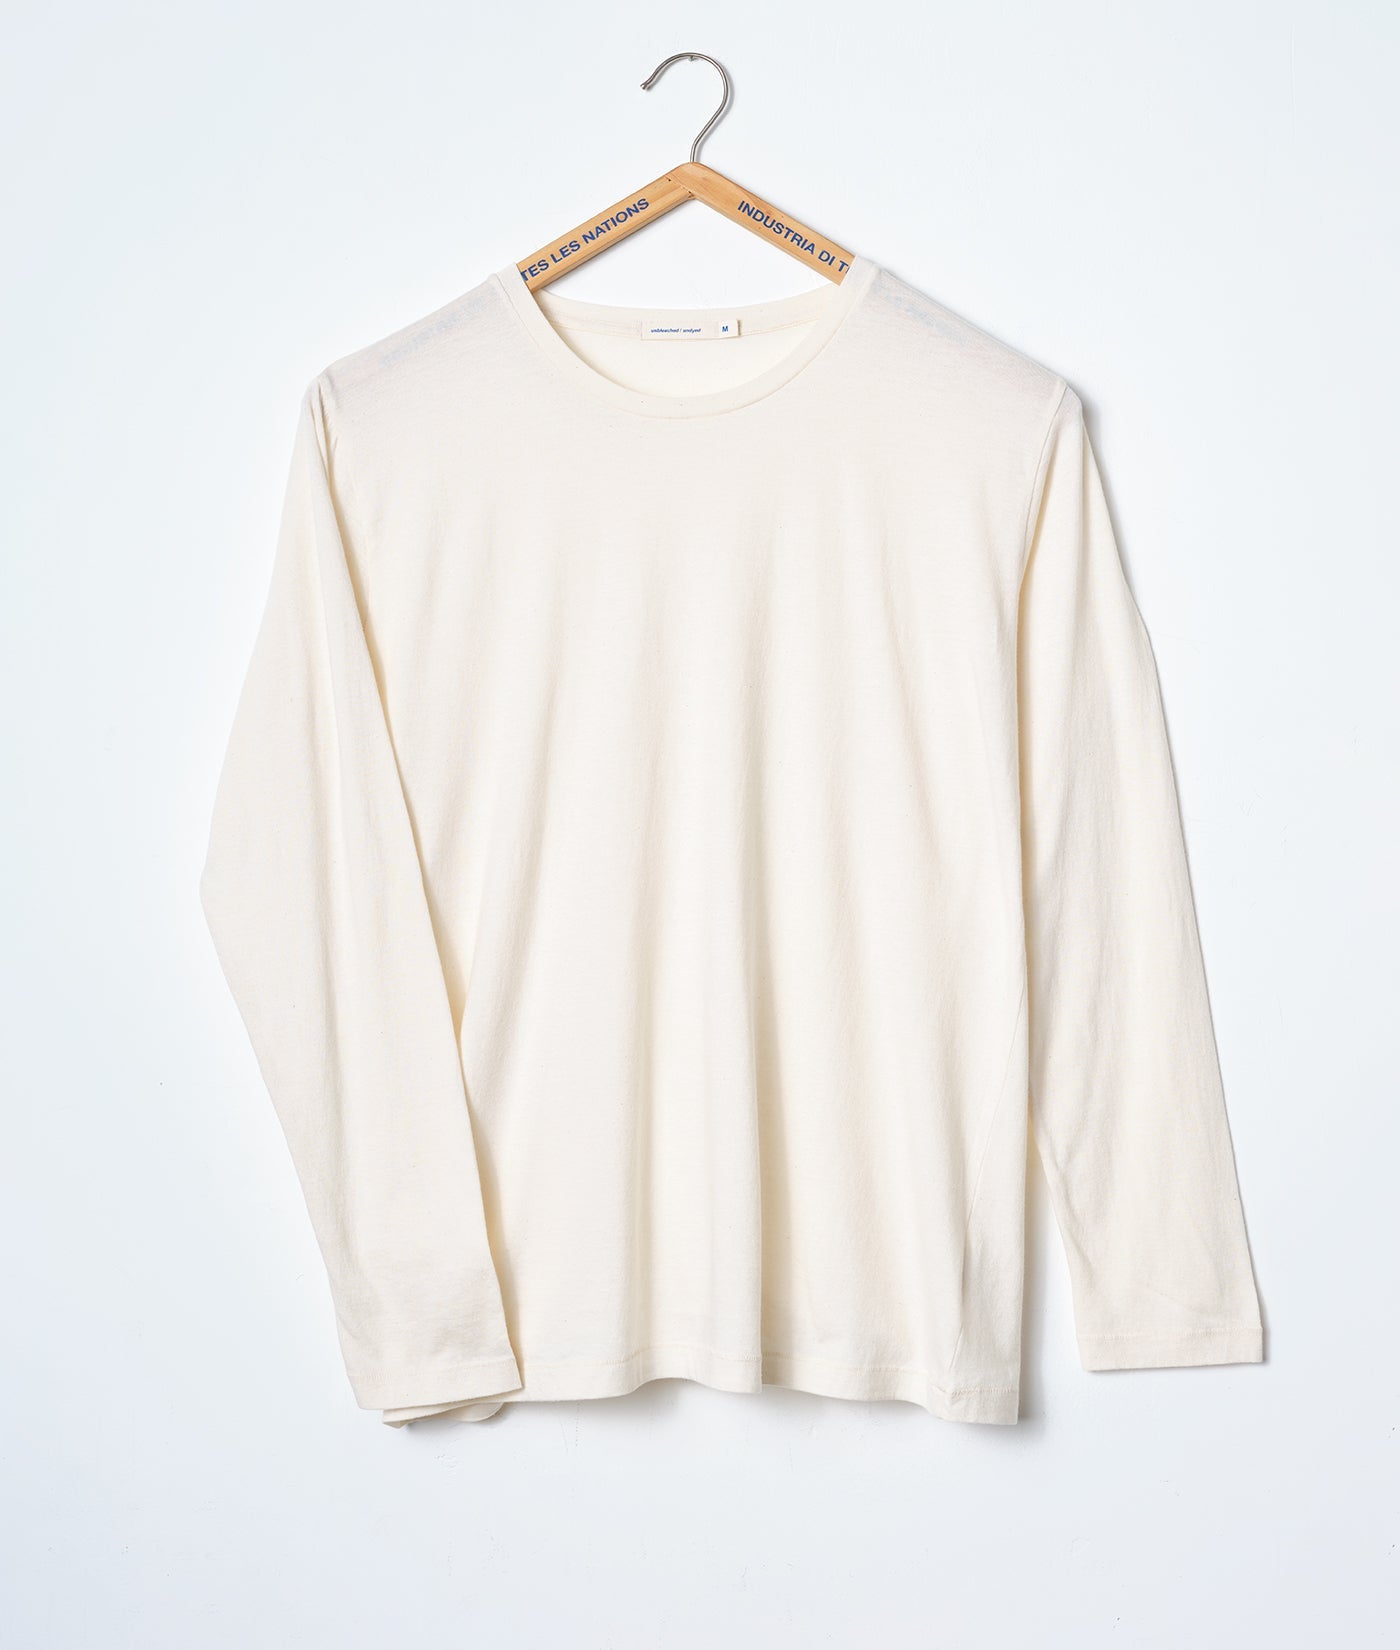 Industry of All Nations Clean Crewneck Long Sleeve T-Shirt, Undyed